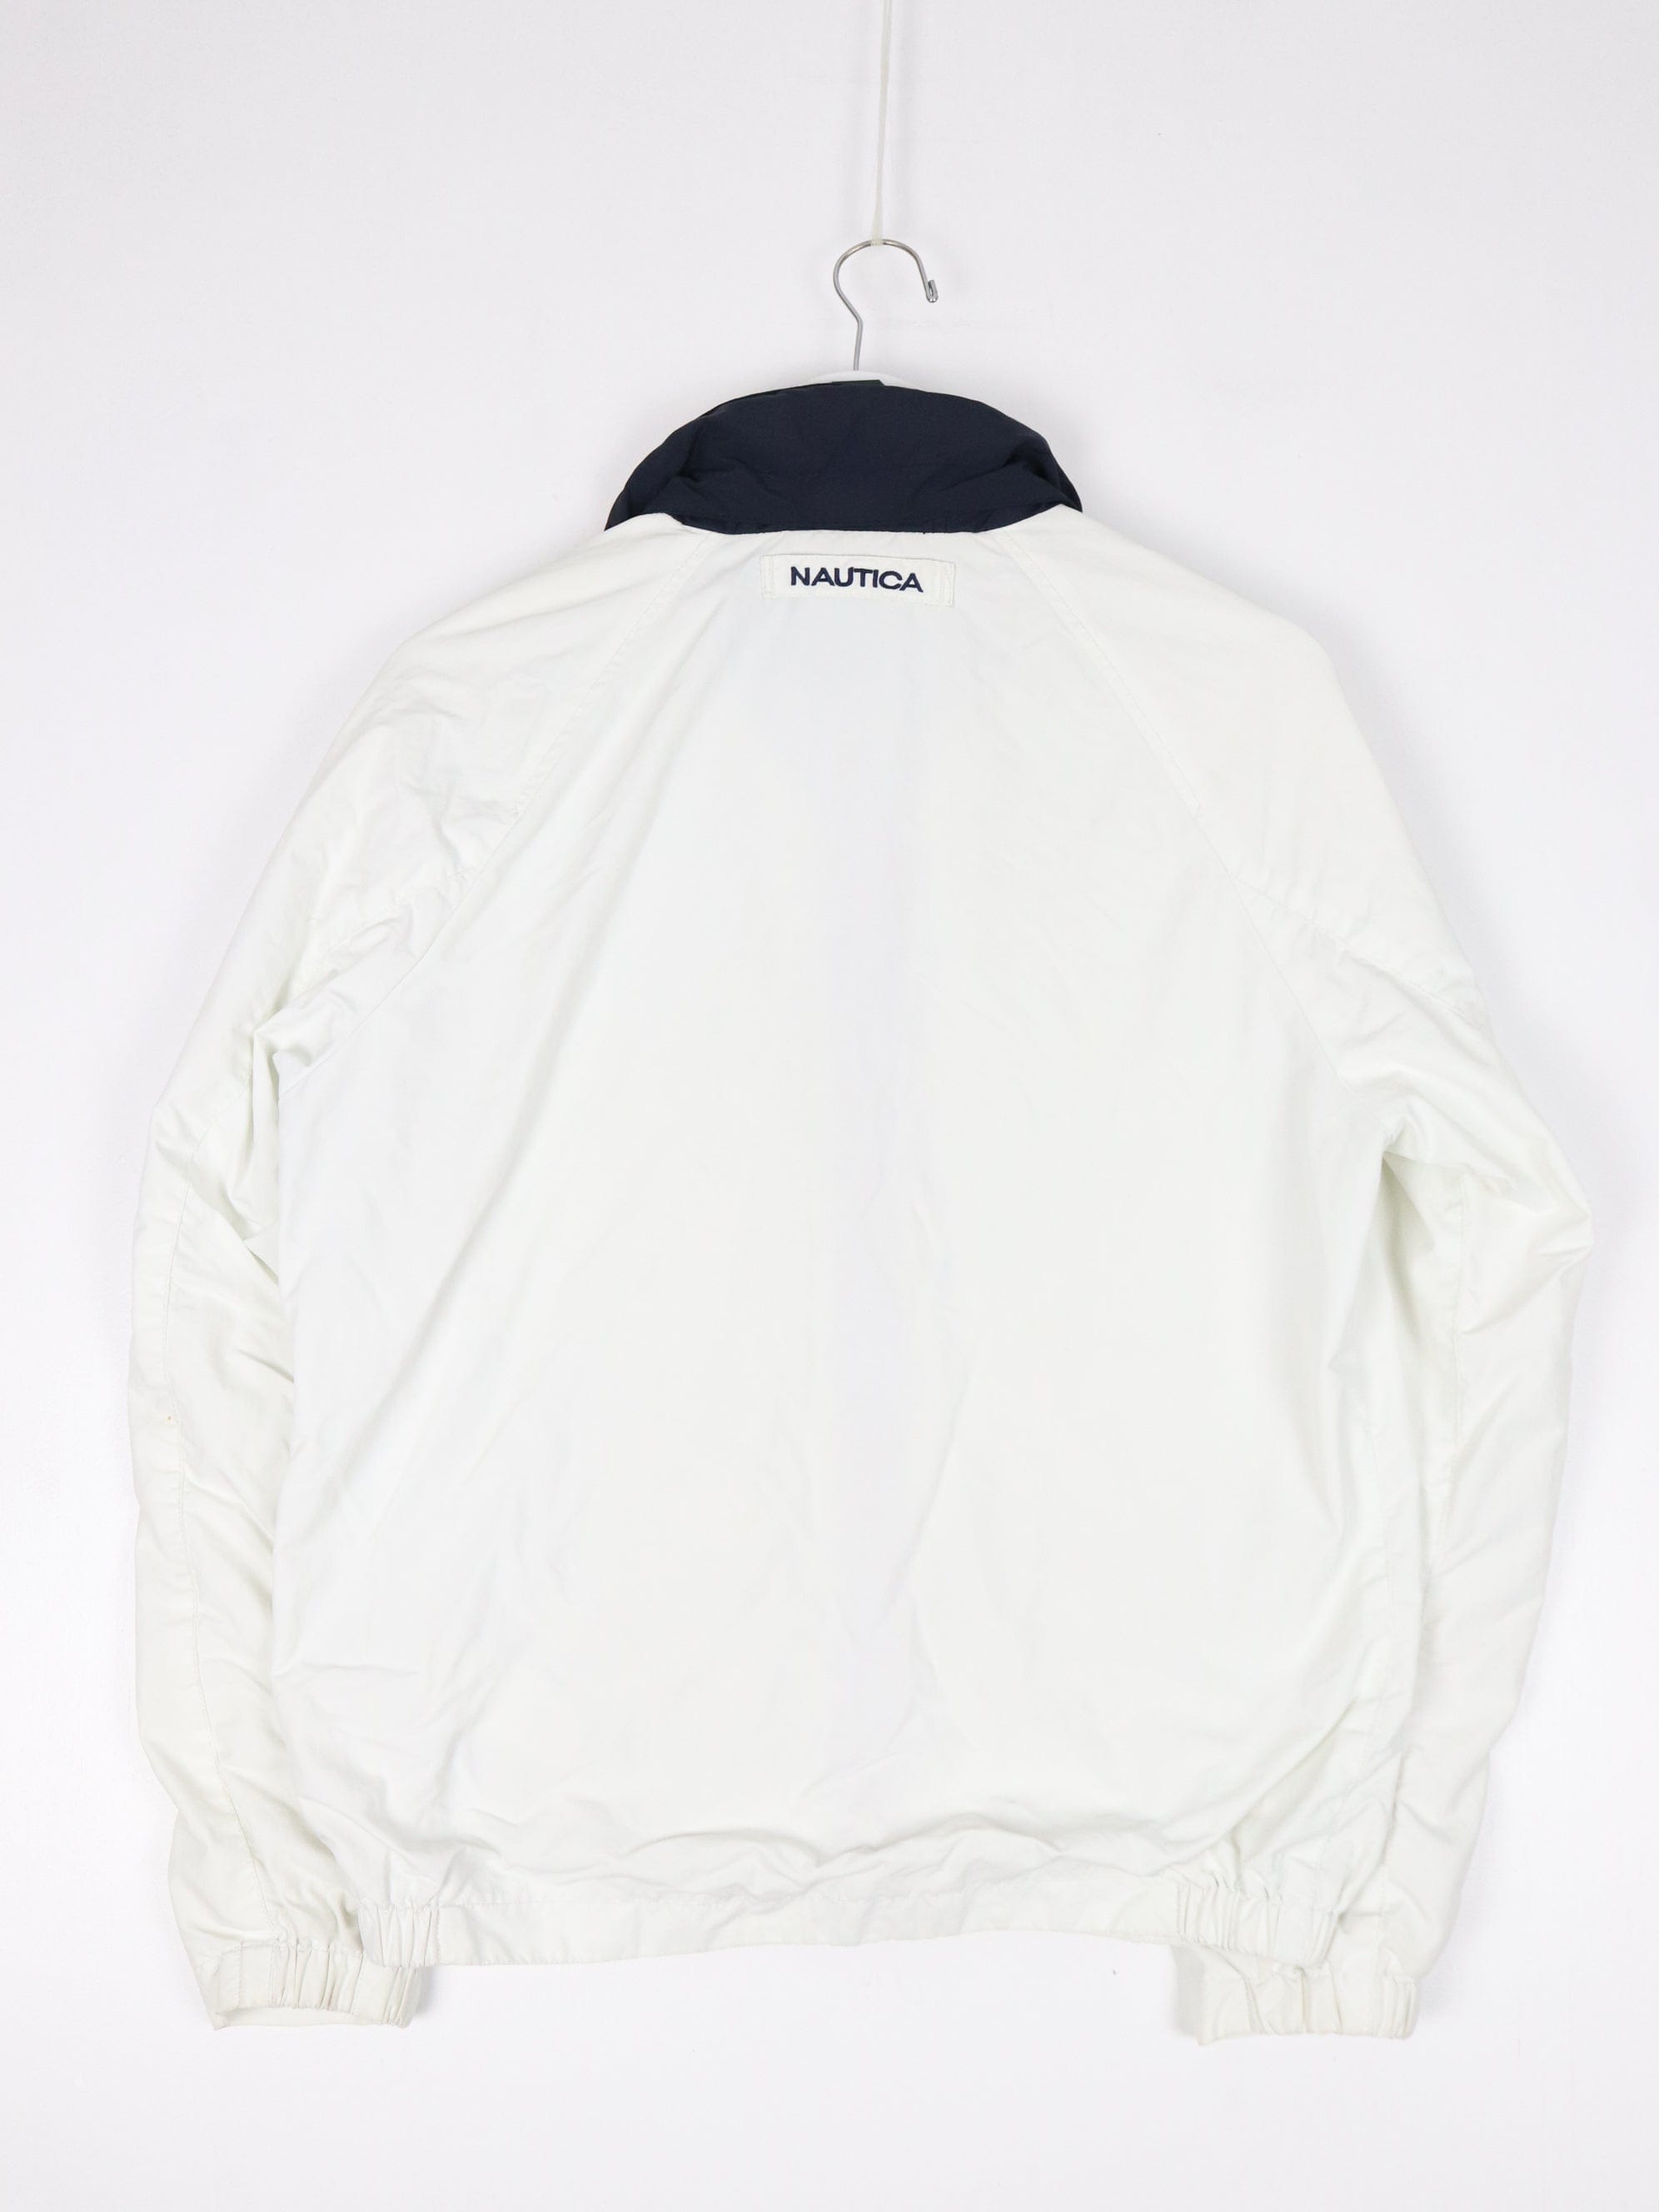 Nautica Jacket Mens XS White Sailing Windbreaker Outdoors Spell Out